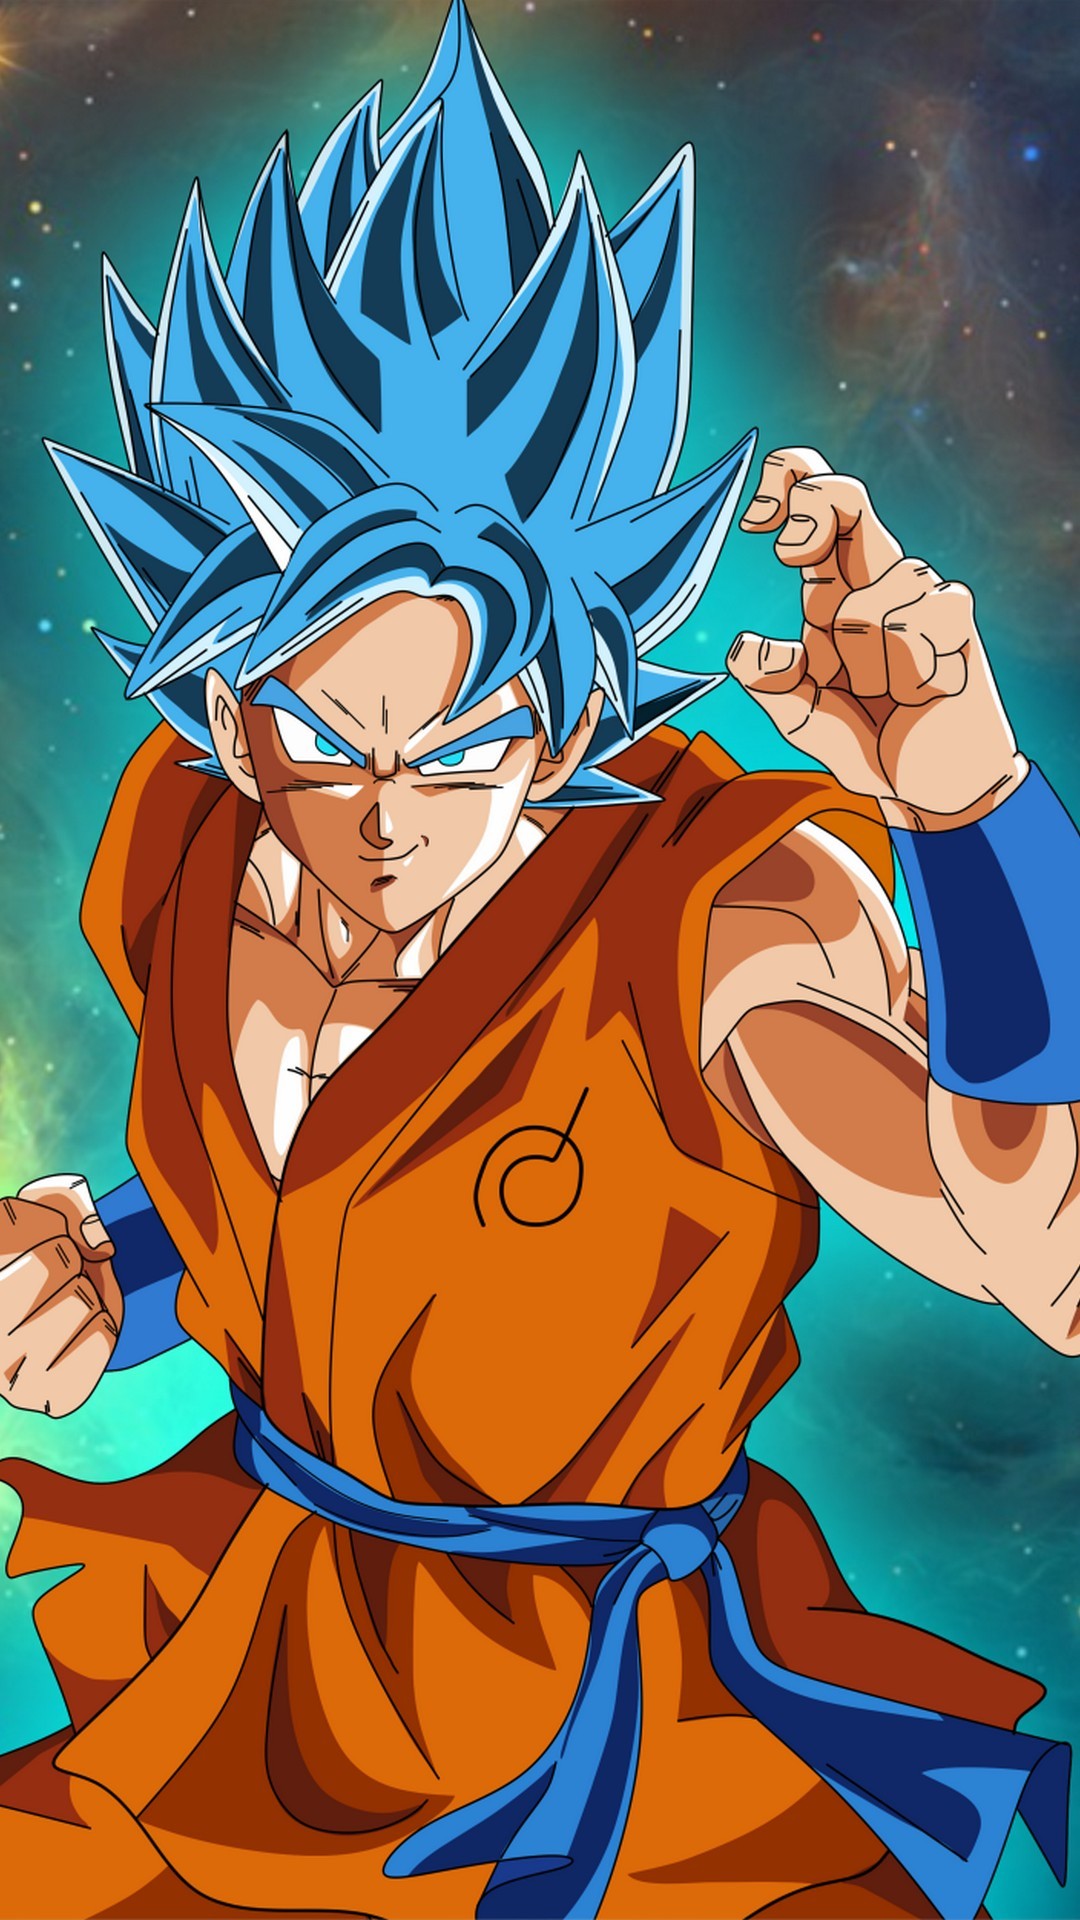 Wallpaper Goku SSJ iPhone with image resolution 1080x1920 pixel. You can make this wallpaper for your iPhone 5, 6, 7, 8, X backgrounds, Mobile Screensaver, or iPad Lock Screen